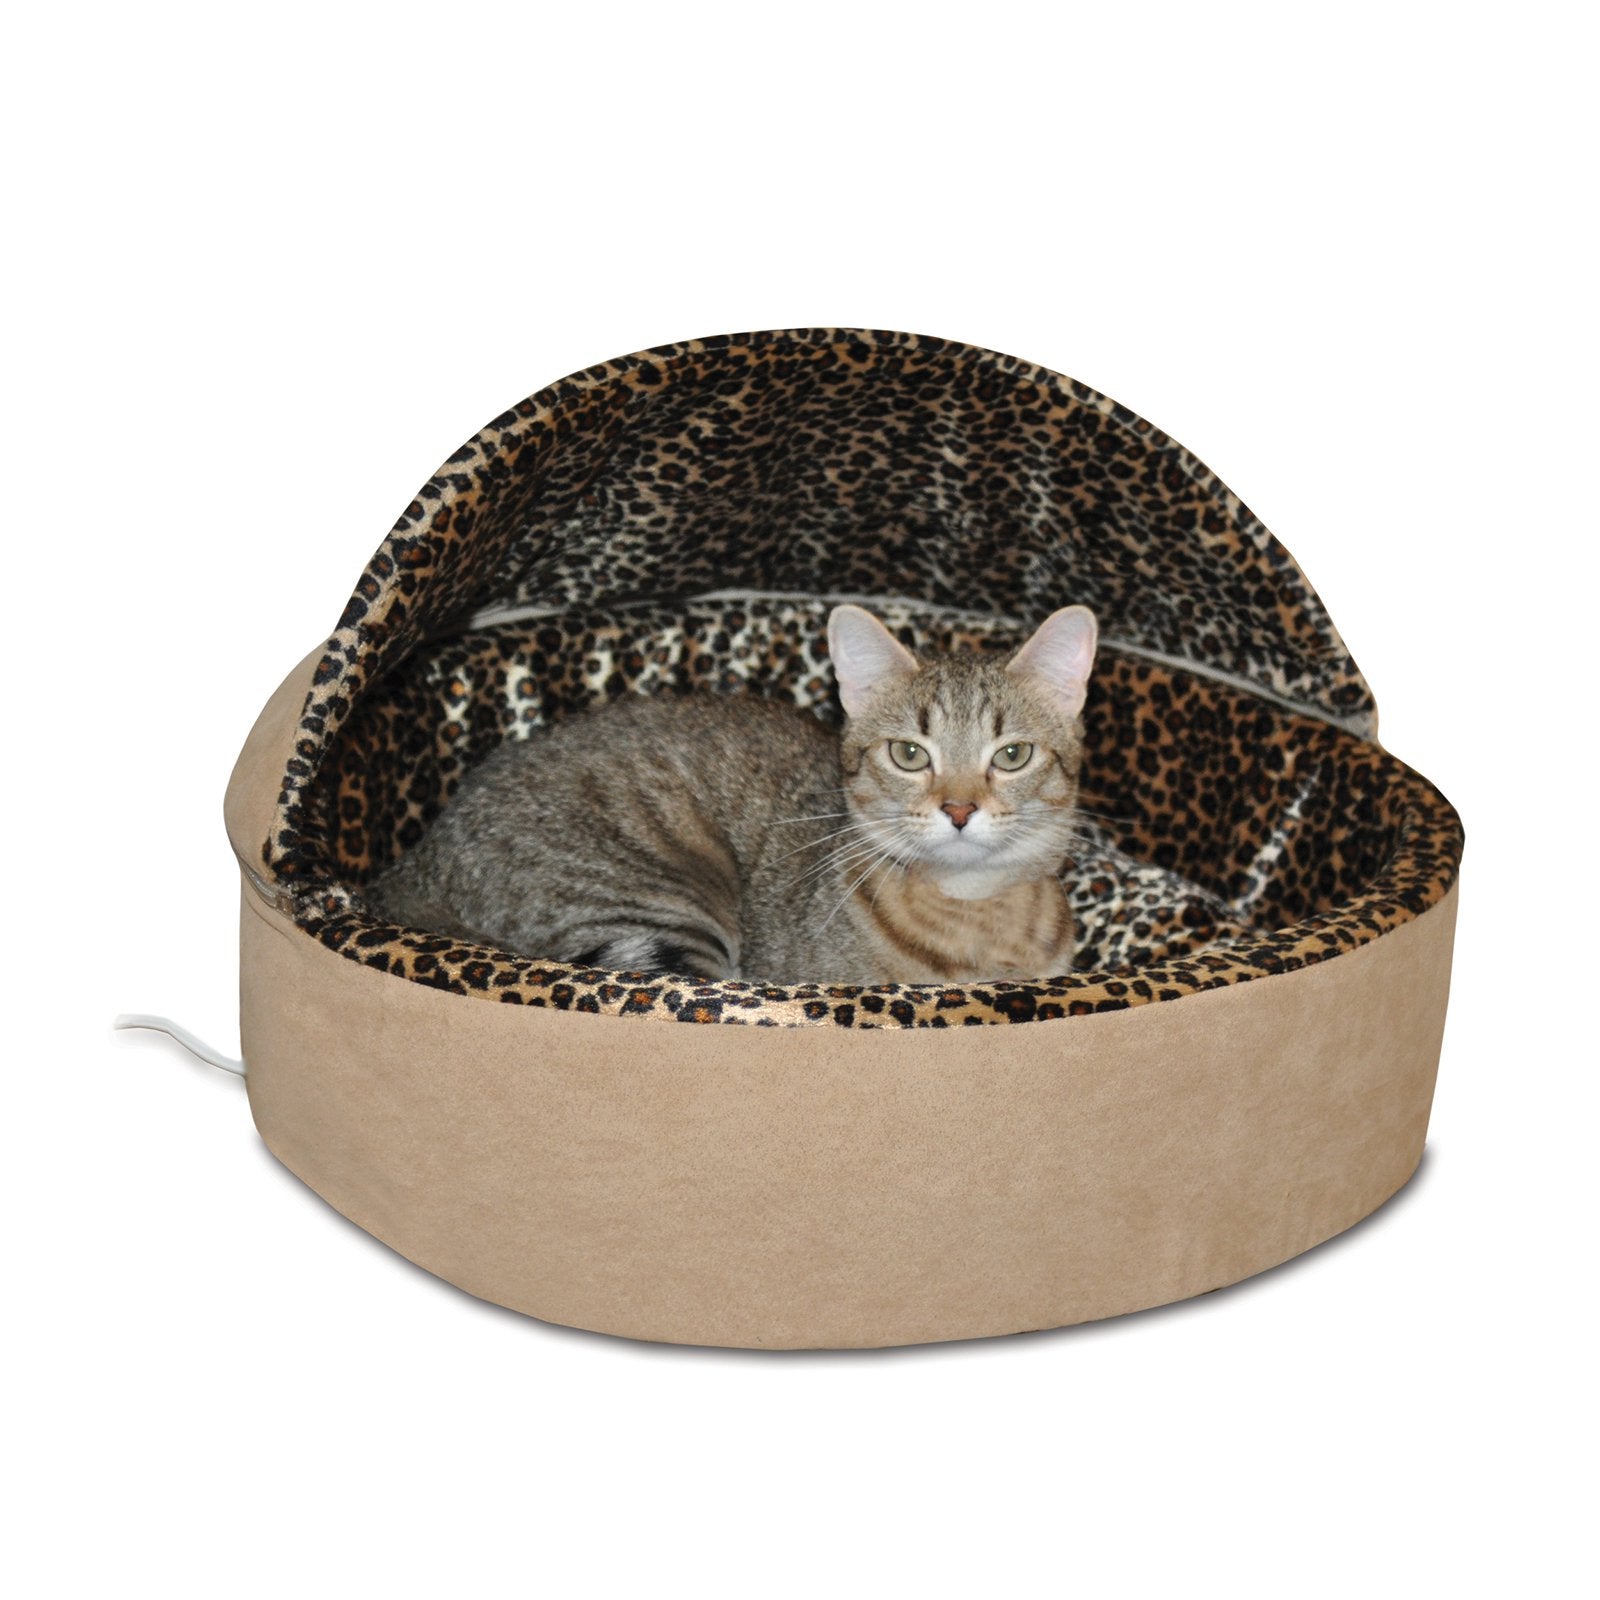 K&H Thermo Kitty Pet Cat Bed, Tan/Leopard